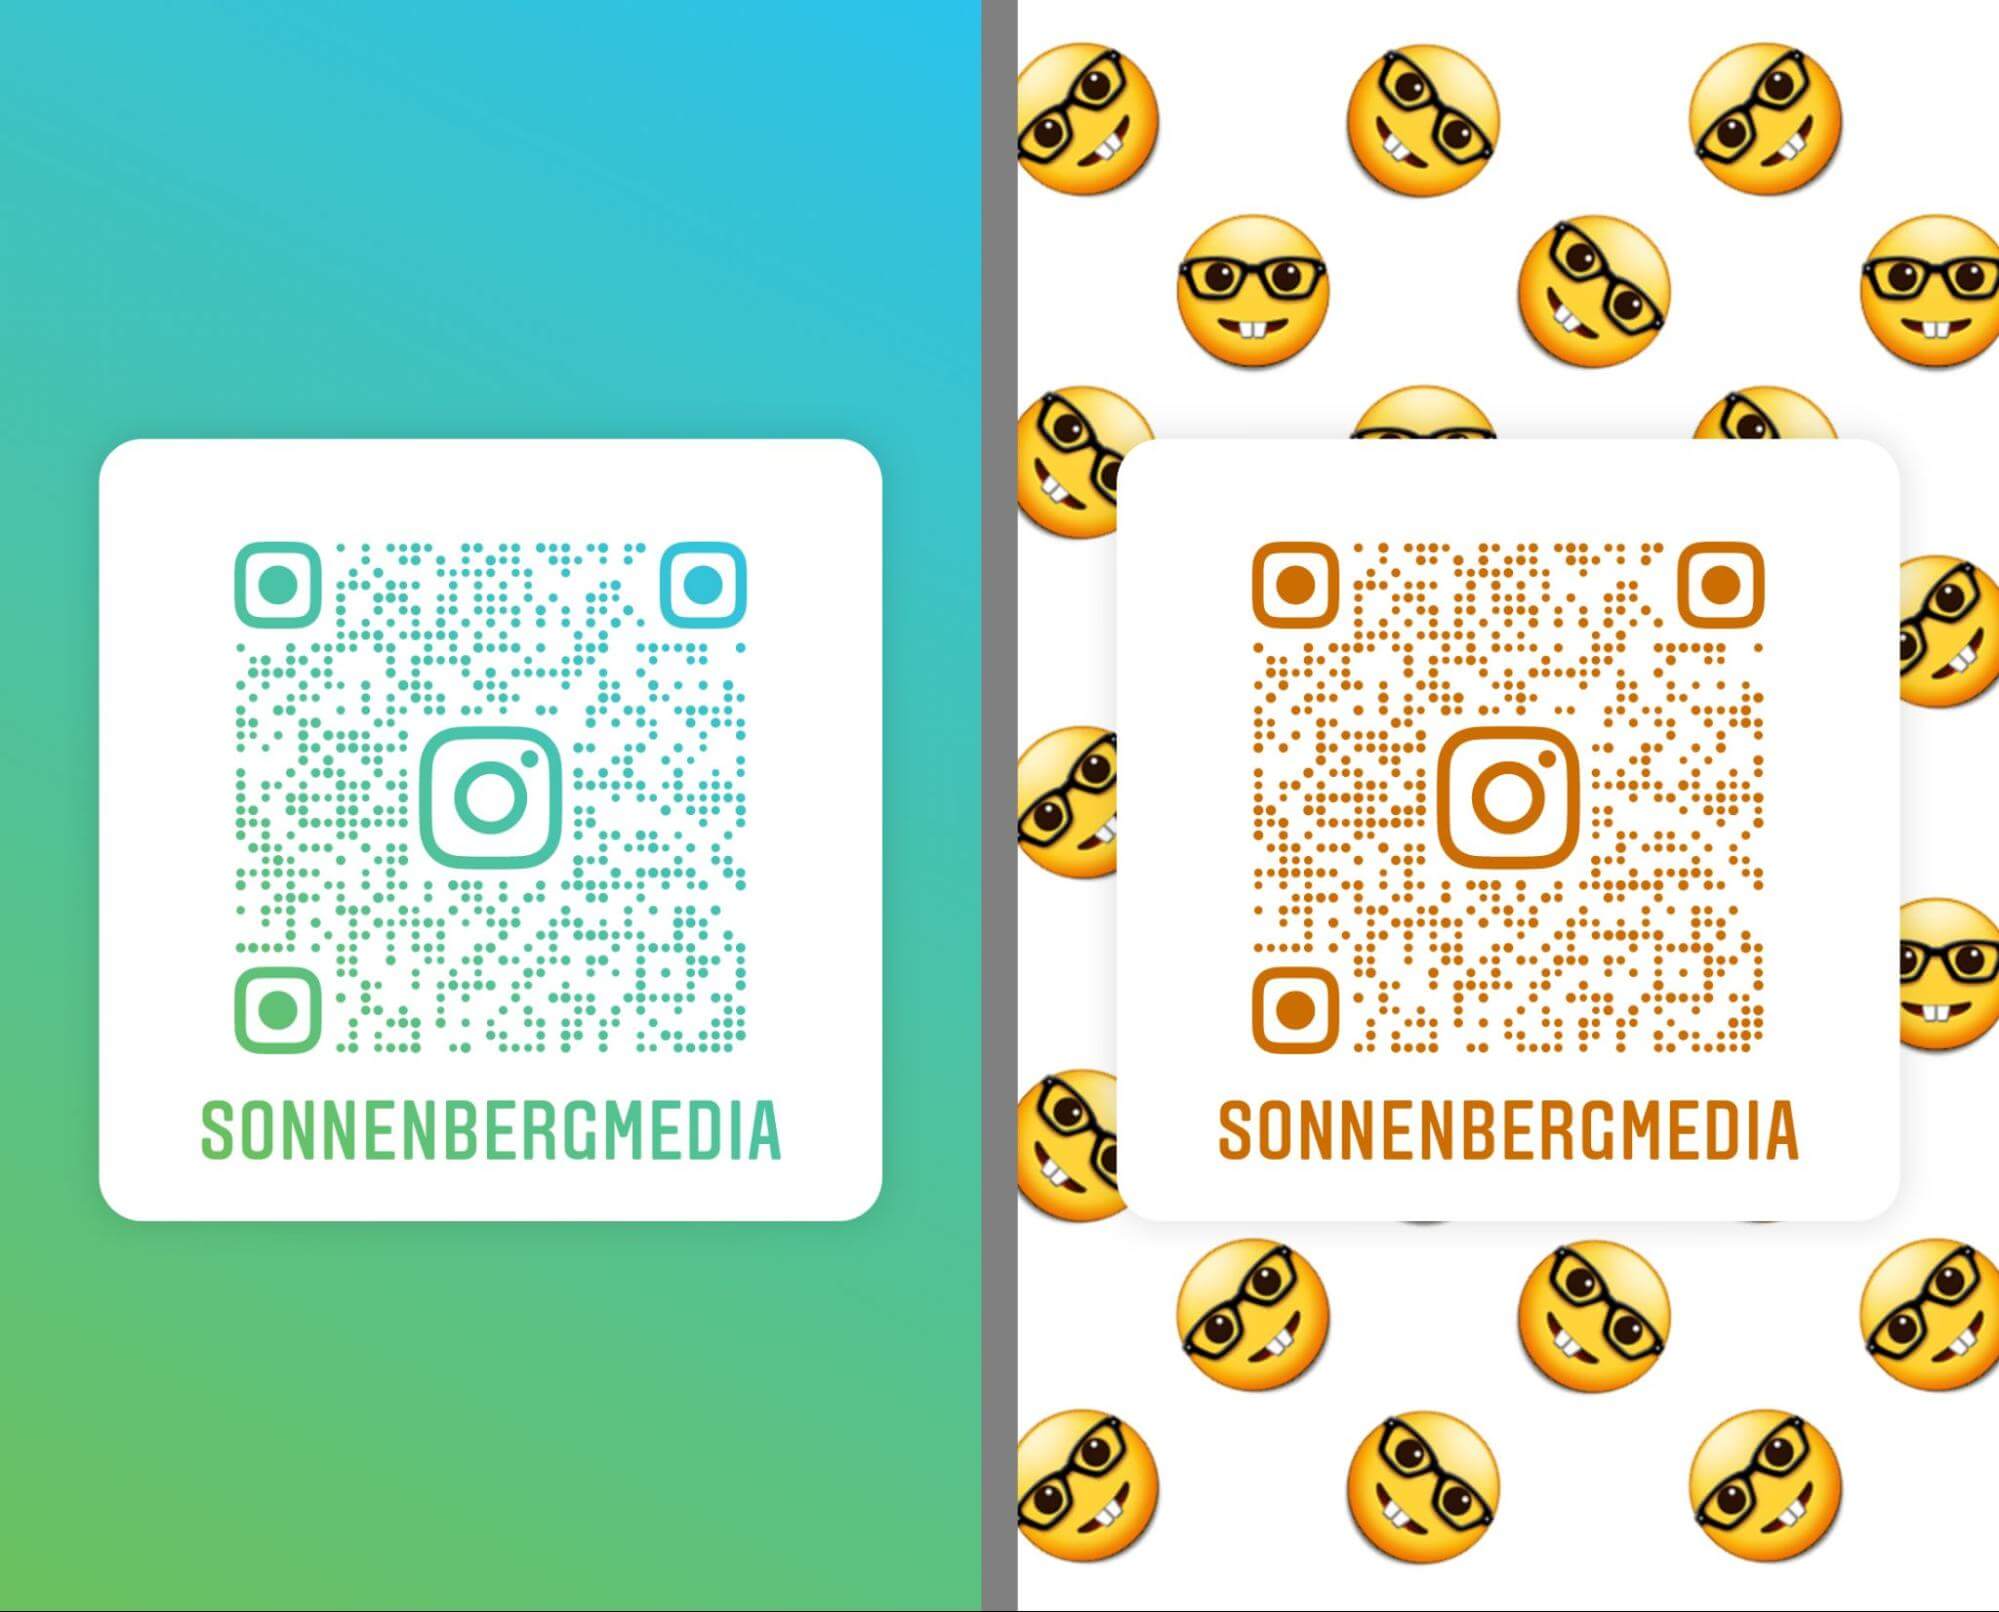 how-to-create-an-instagram-qr-code-to-share-a-profile-change-color-design-options-emoji-pattern-sonnenbergmedia-example-12